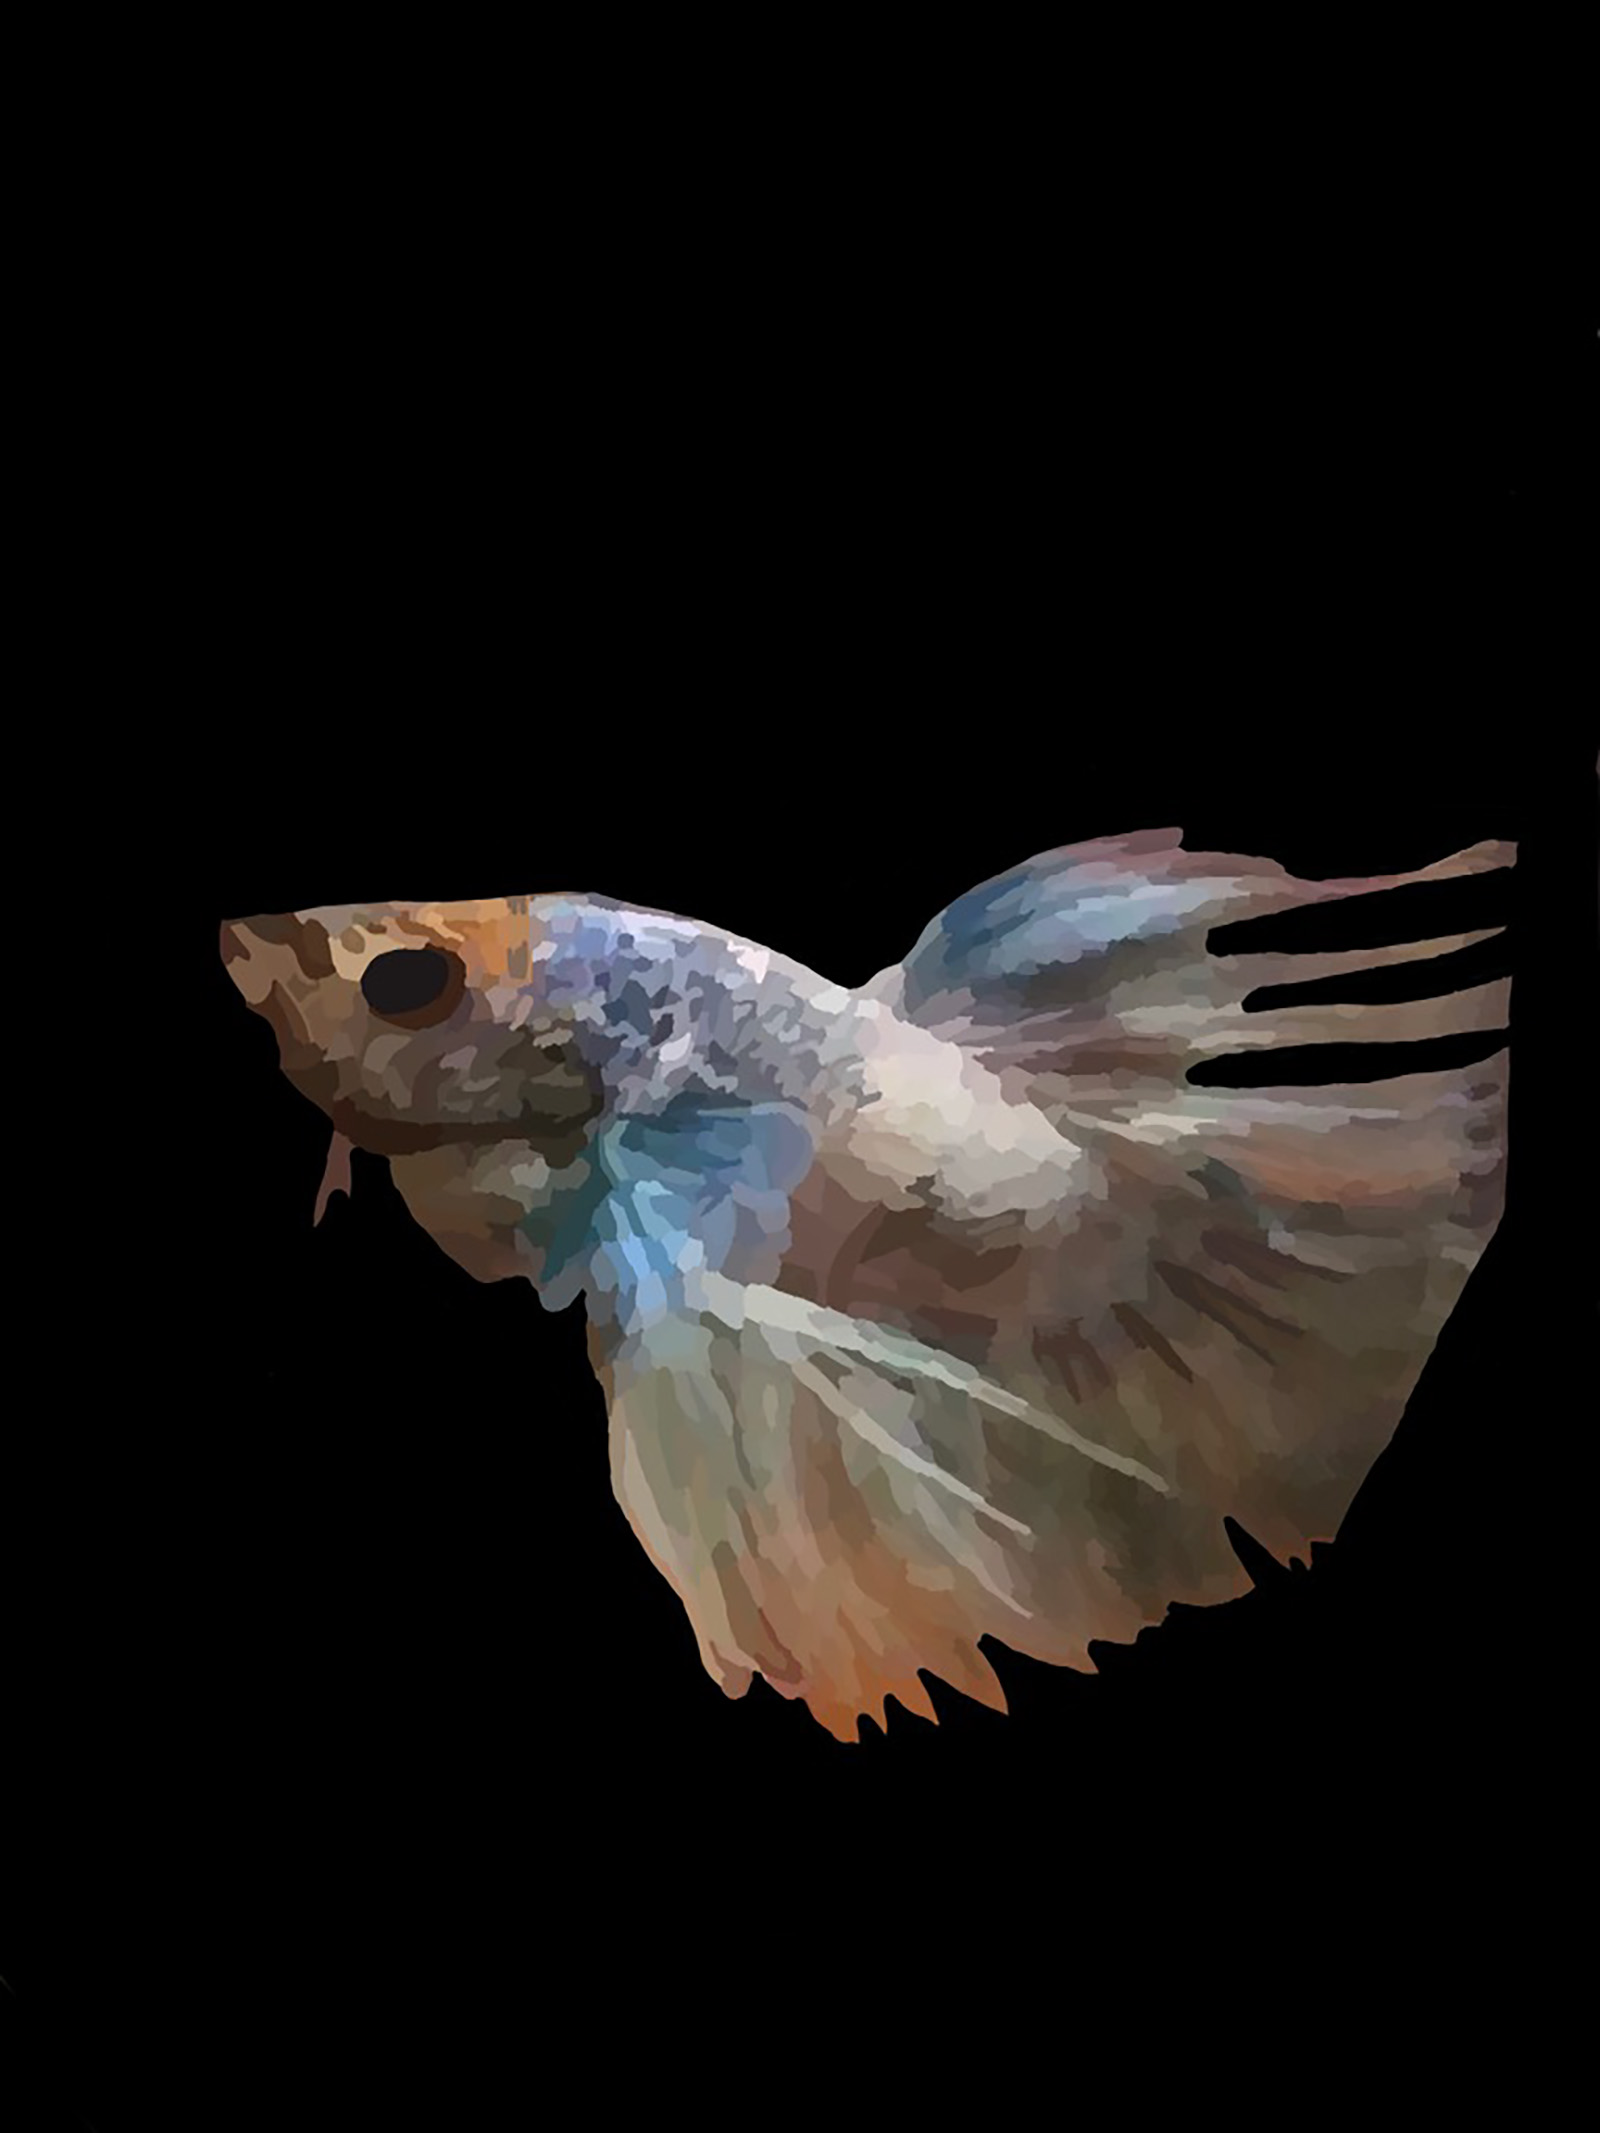 PICTURED: An illustration of a beta fish against a black background.